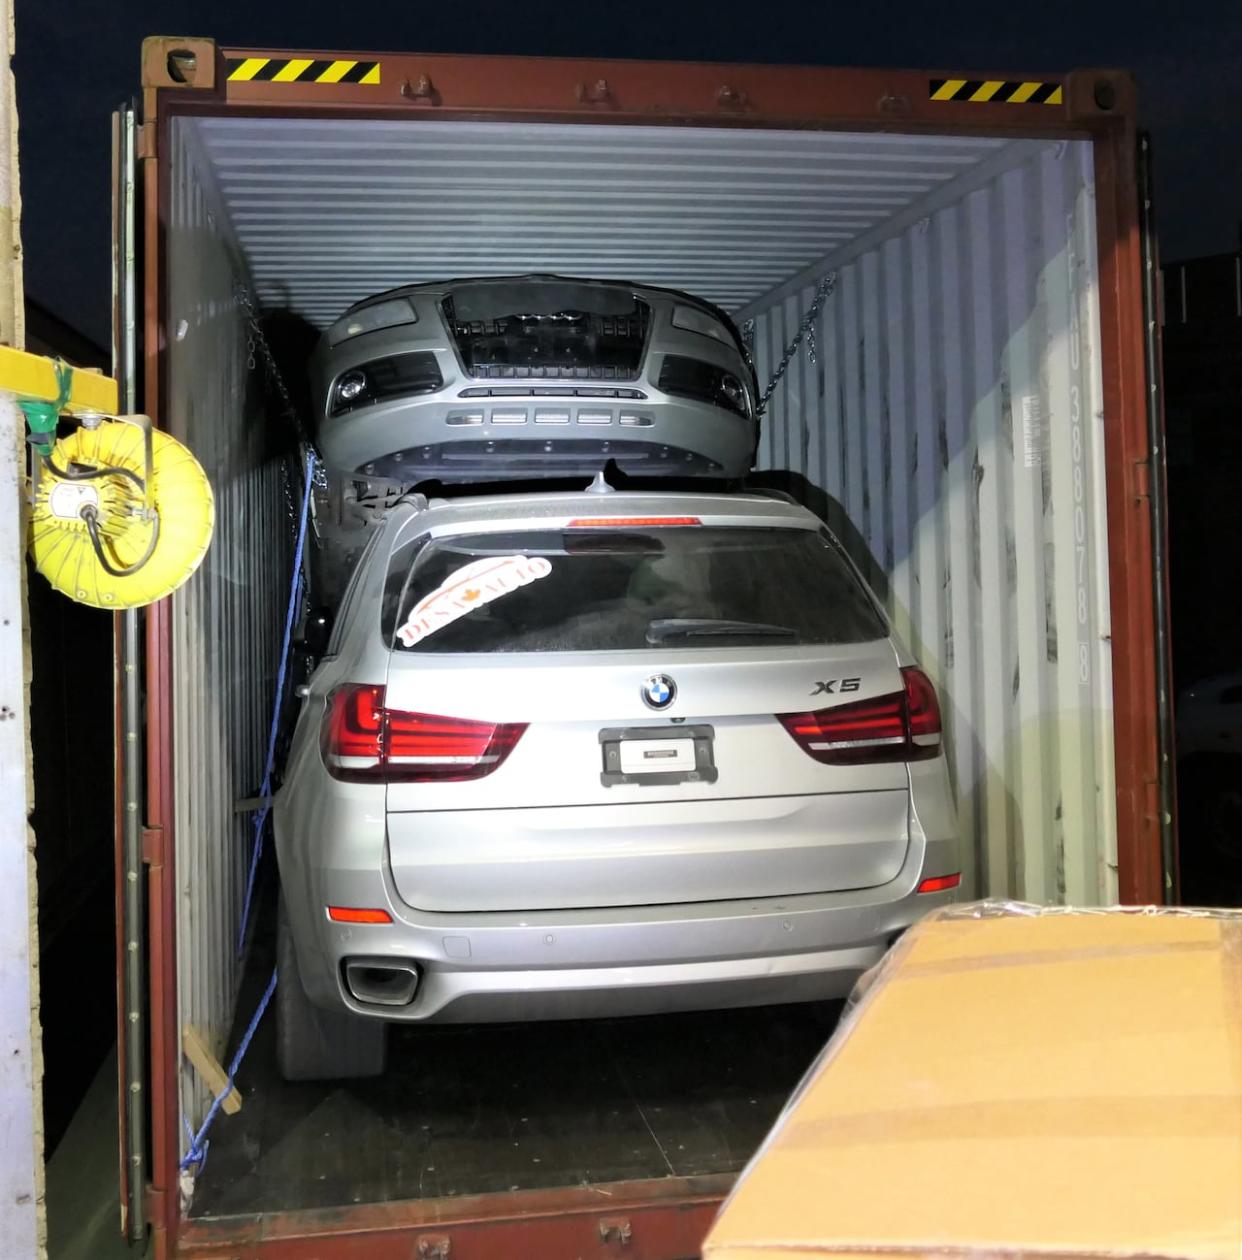 On Monday, York Regional Police announced the recovery of 52 stolen cars taken from York Region, the GTA and southwestern Ontario. (York Regional Police handout - image credit)